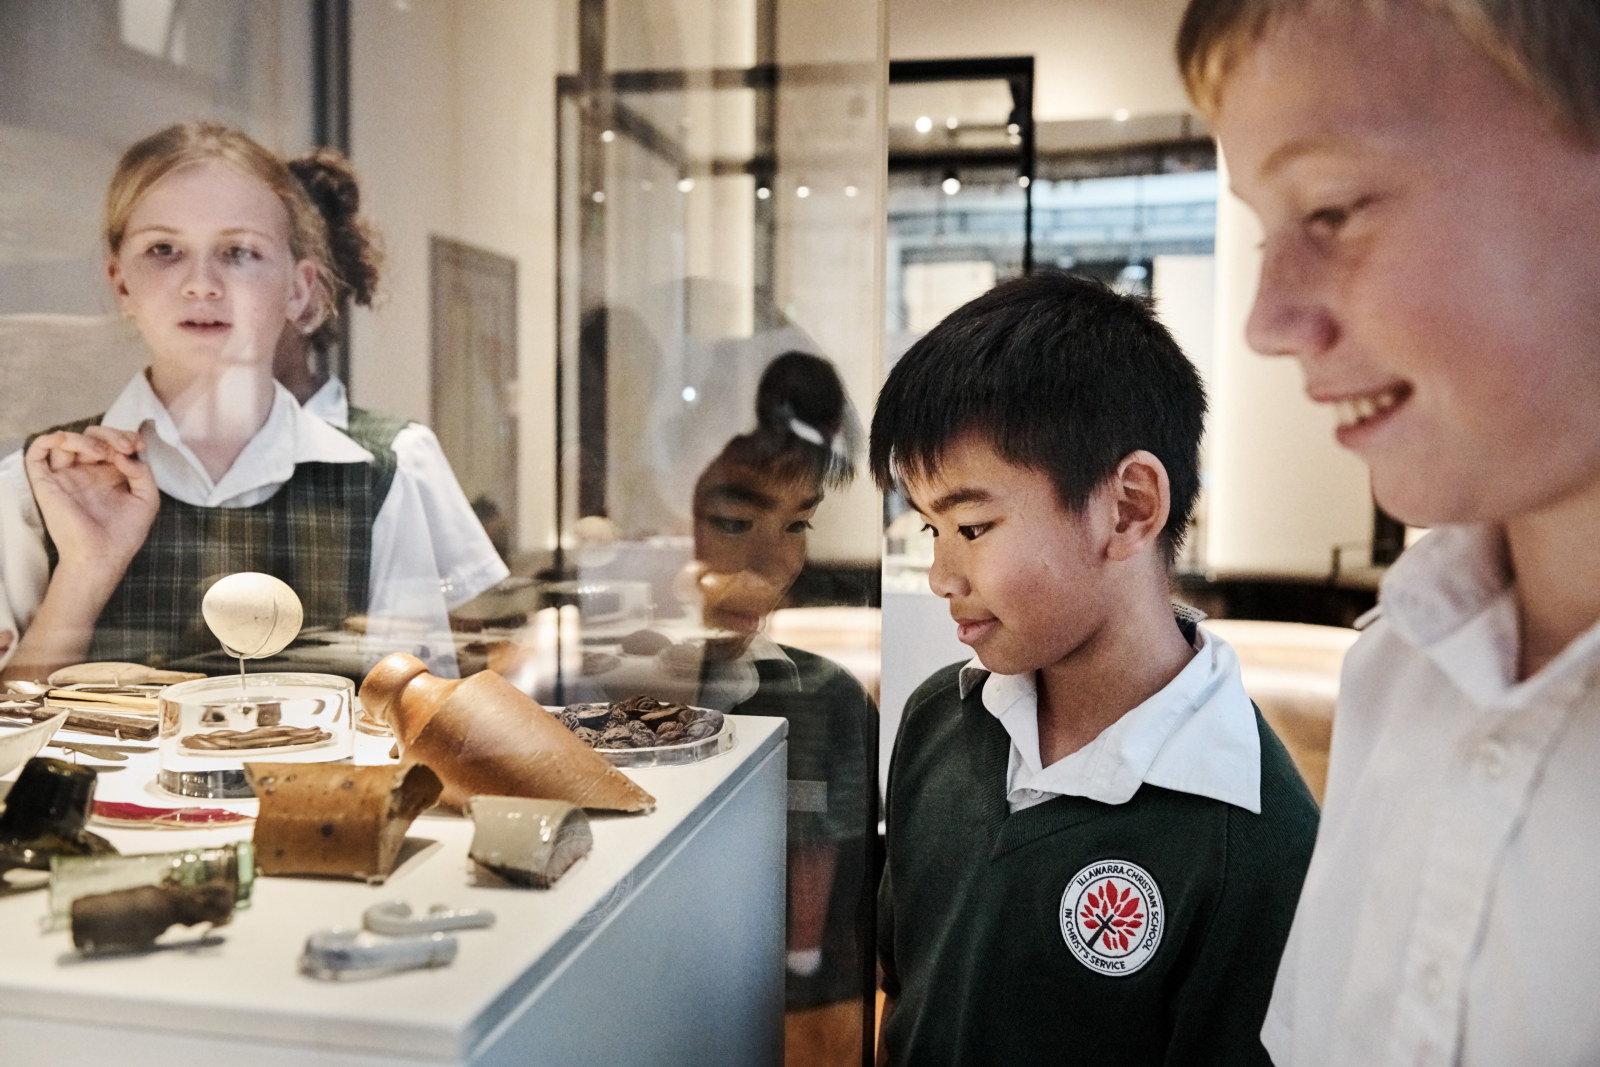 Students examine the archaeology from Hyde Park Barracks on the Home: Convicts, Migrants & First People Learning program